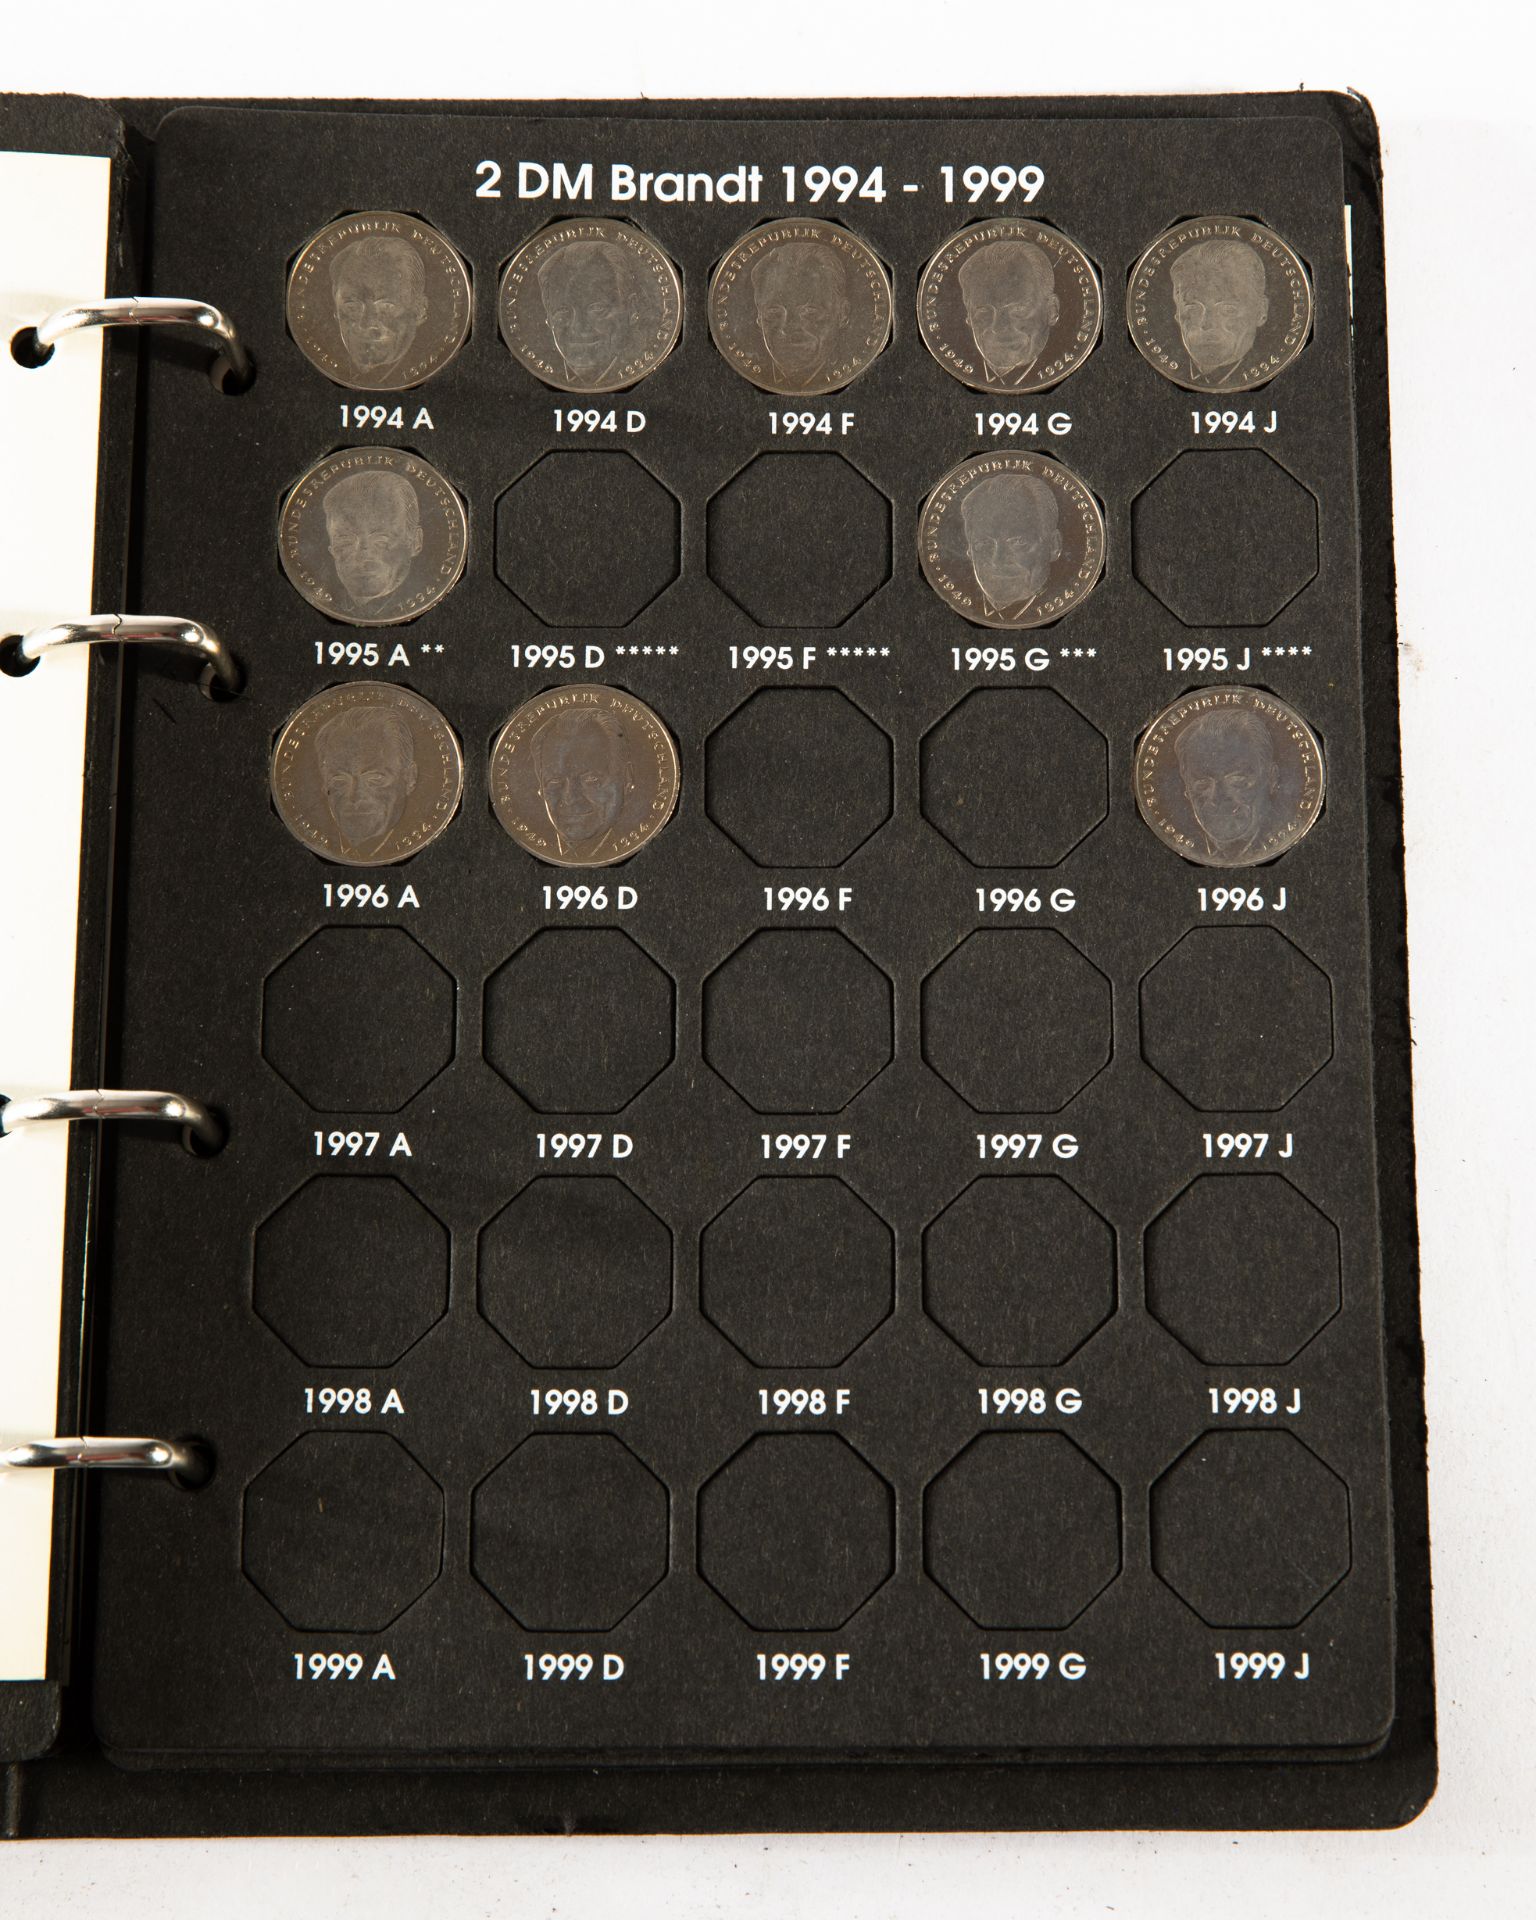 Germany - 2x full coin albums 2 DM Coins 1970-1996 - Image 32 of 33